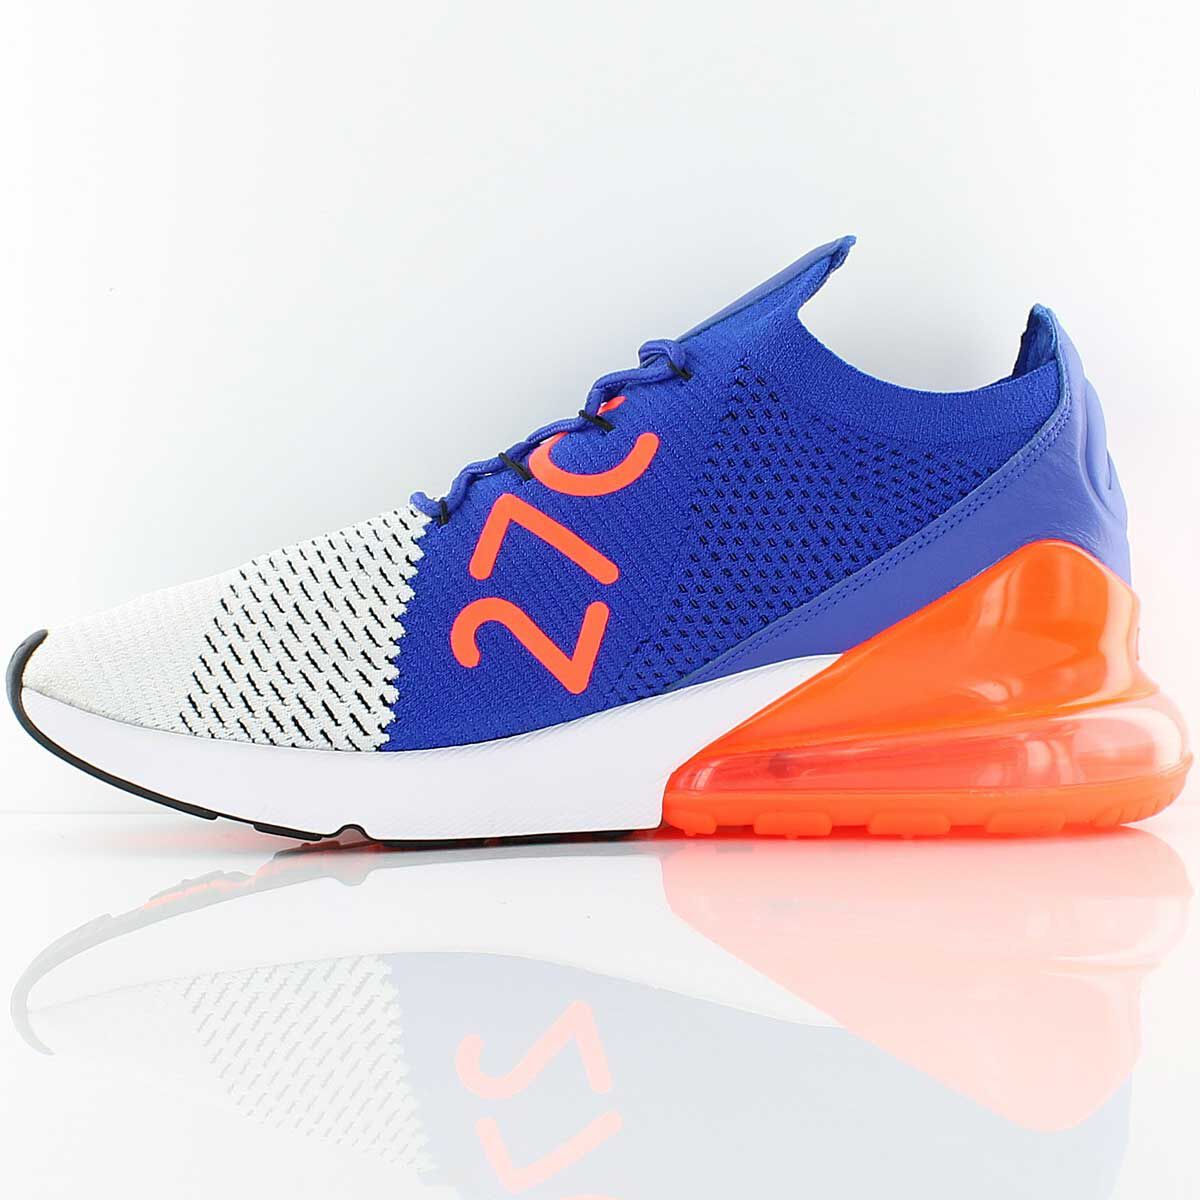 Buy AIR MAX 270 FLYKNIT for N/A 0.0 on 